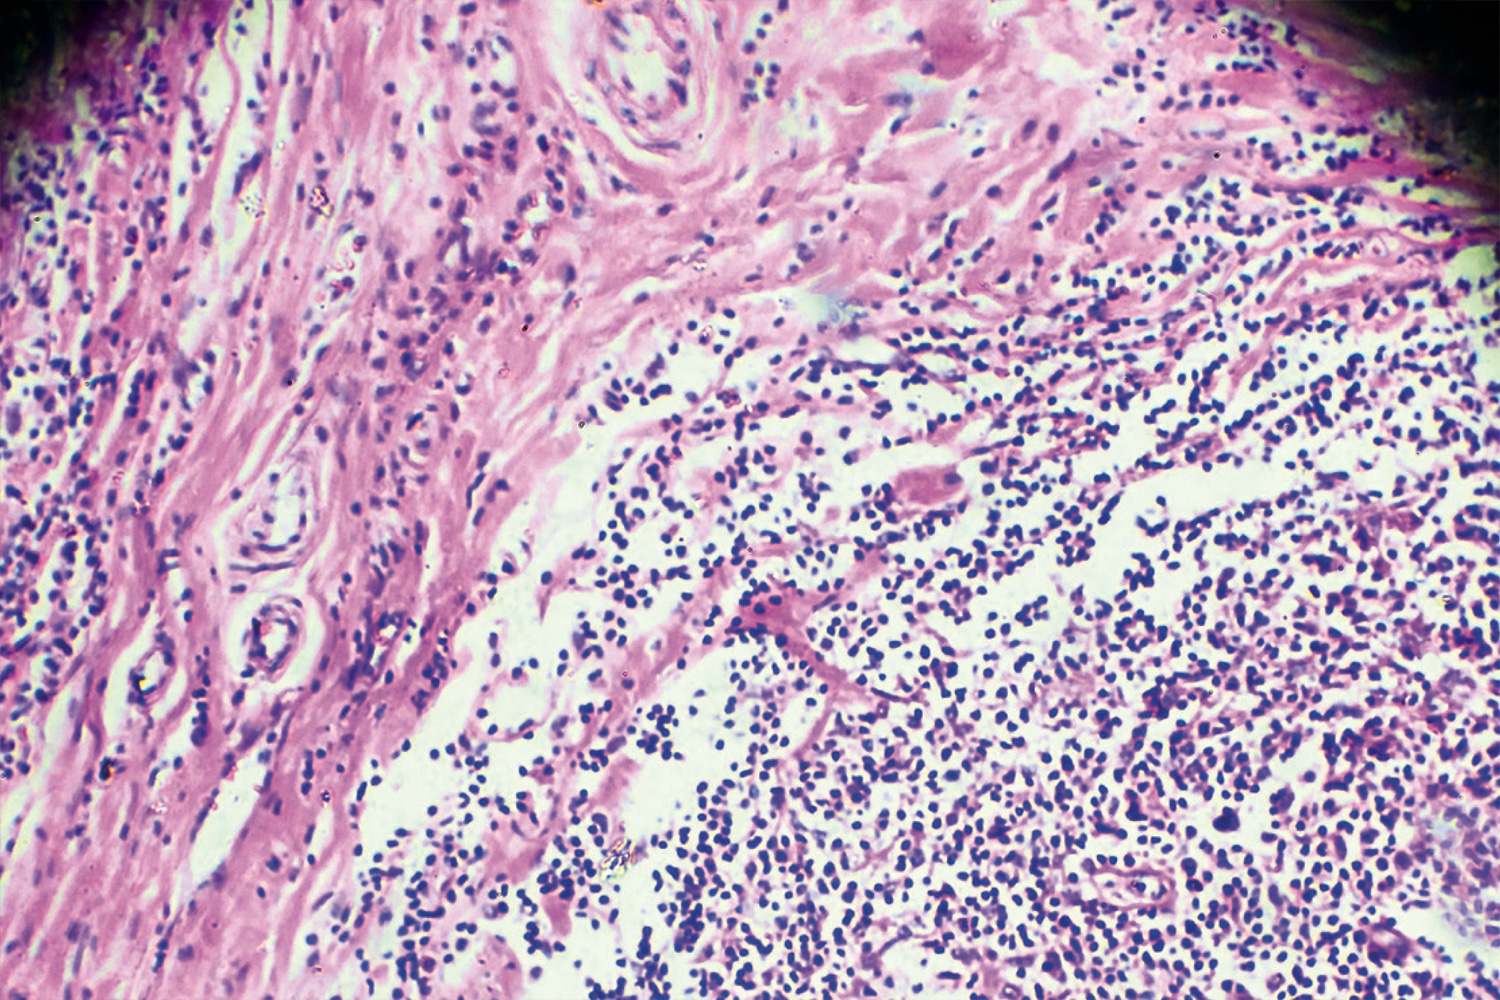 Microscopic view of Hodgkin lymphoma shows closely packed granules with a few patches and strands in-between